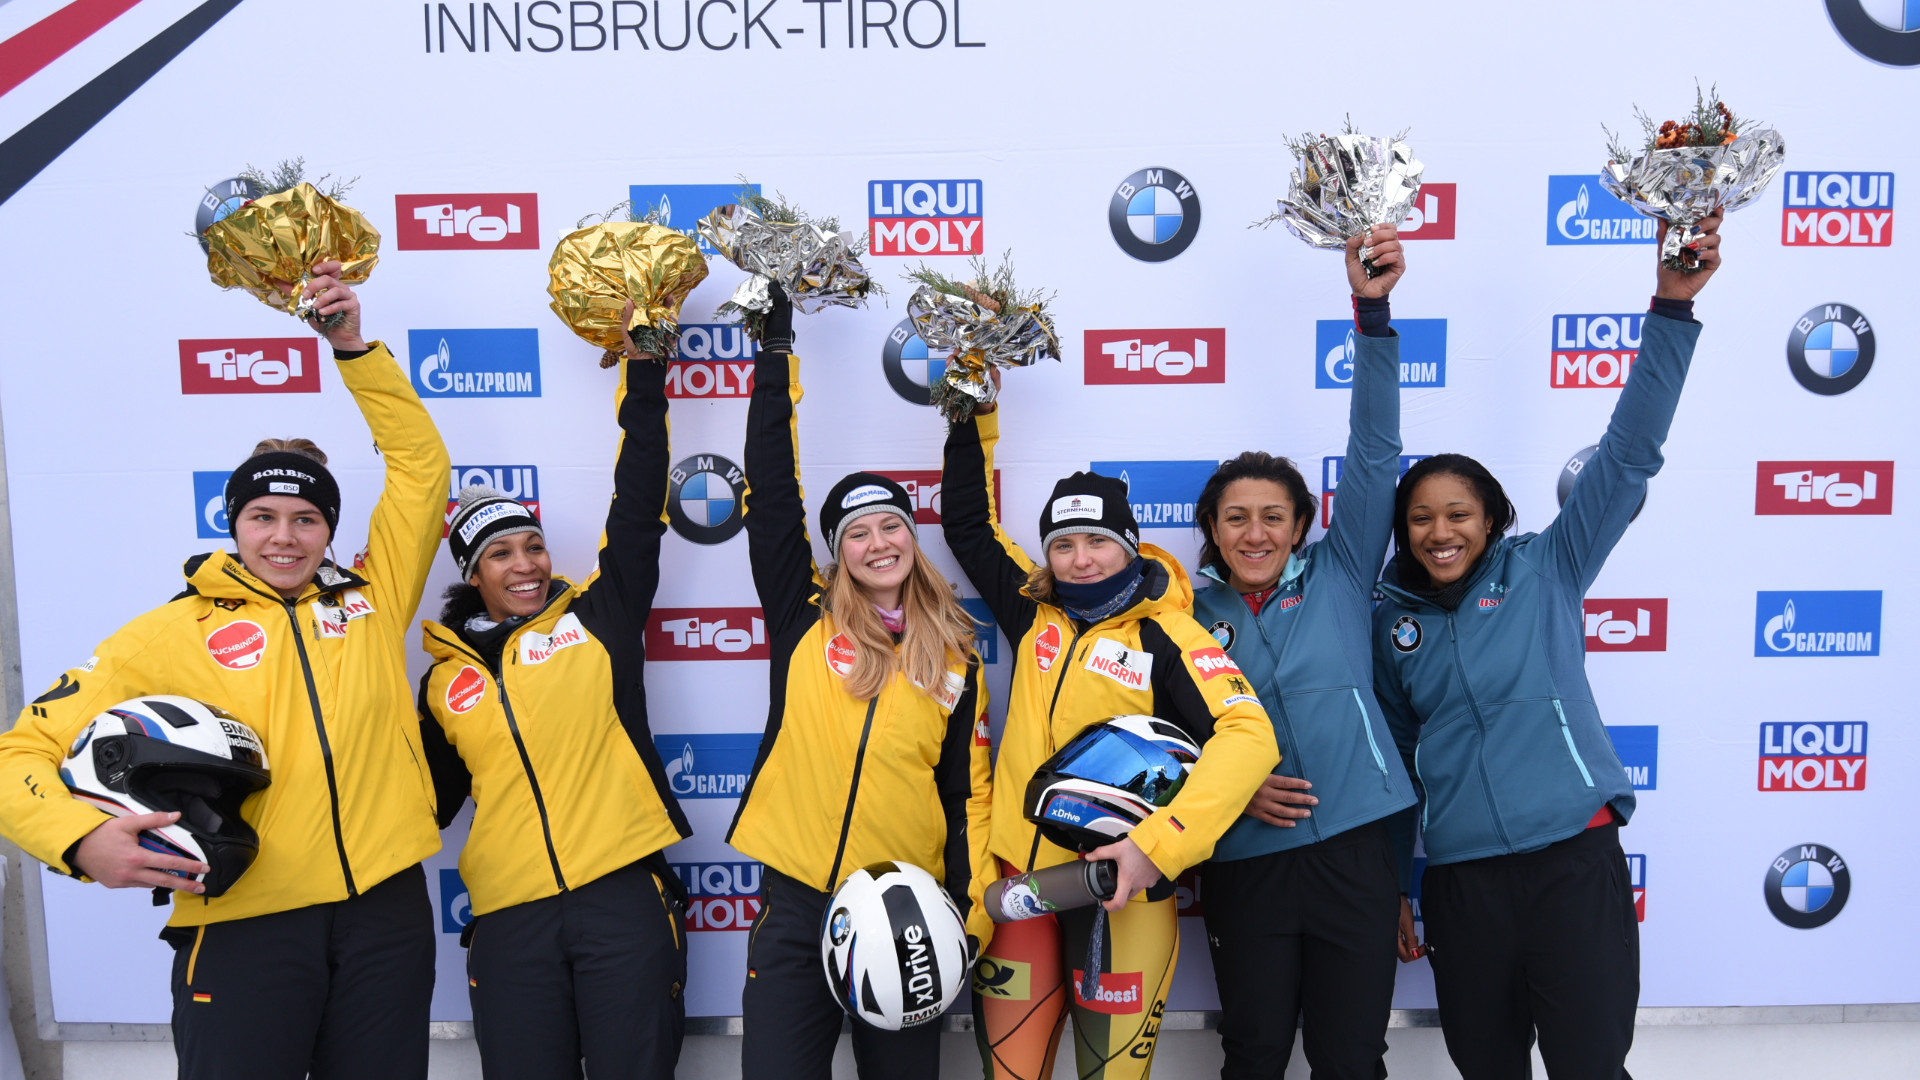 Germany's Stephanie Schneider, third right, and partner Ann-Kristin Strack top the podium at the IBSF women's bobsleigh World Cup event in Innsbruck ©IBSF